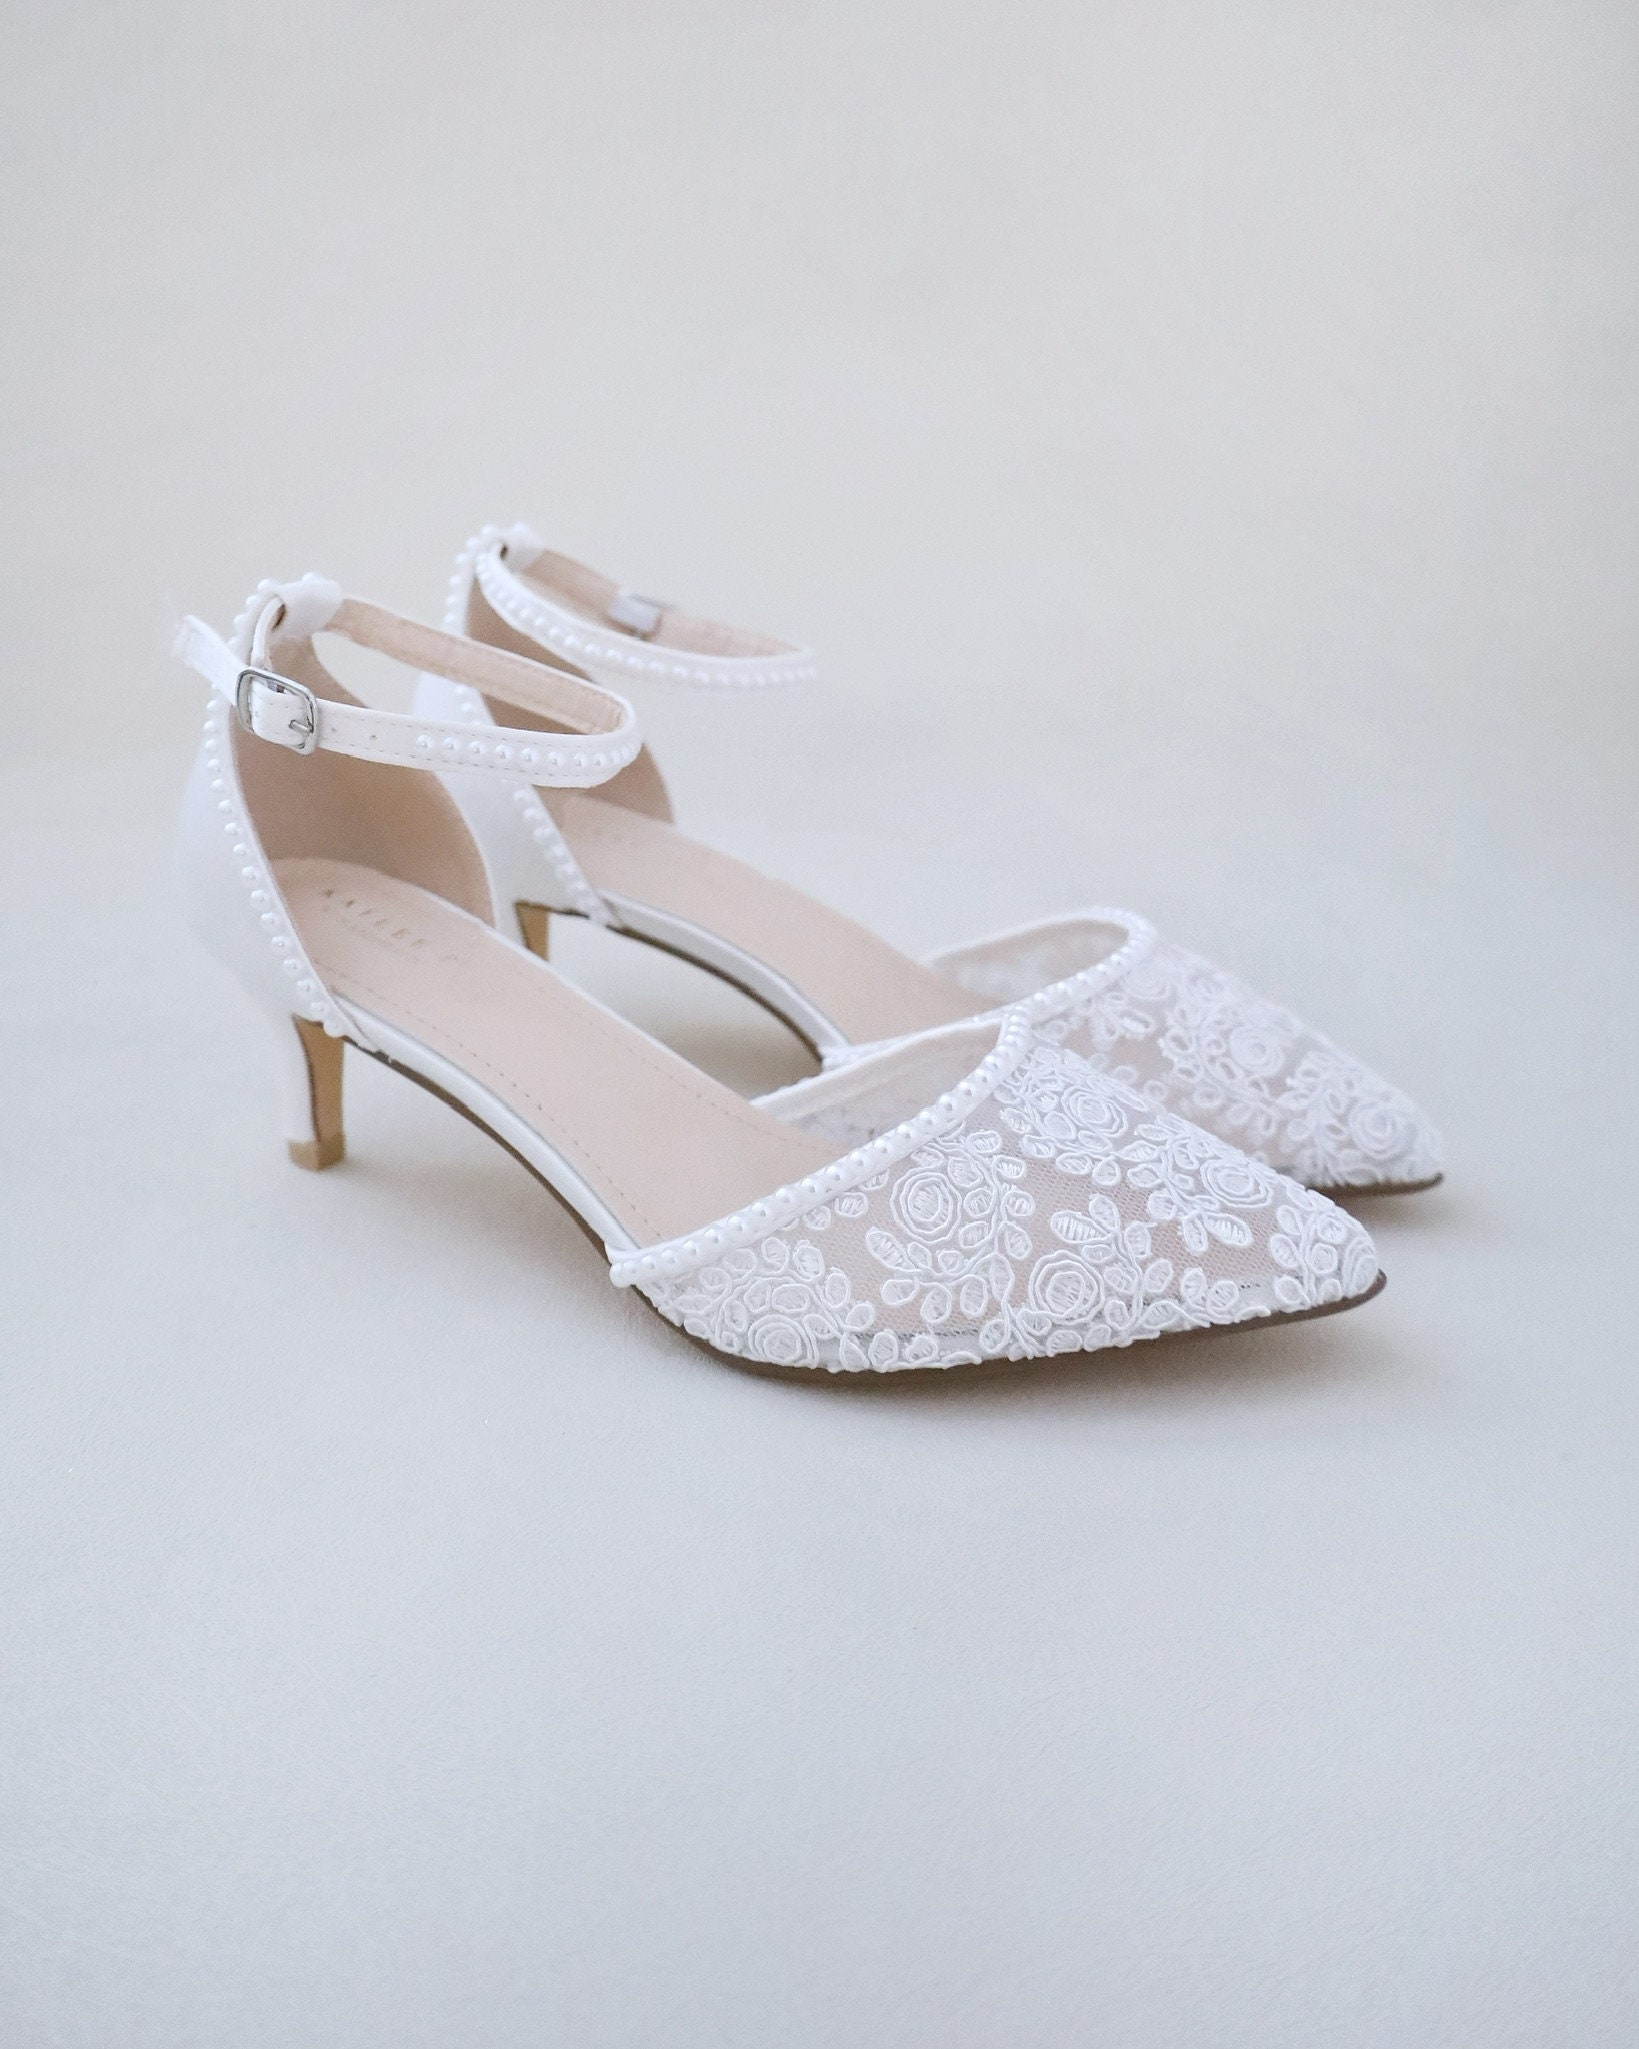 Ivory Slingback Bridal Sandals With Low Kitten Heel and Handmade Pearl  Embroidery, Bridal Shoes With Low Pointy Heel, Suede Wedding Shoes - Etsy | Bridal  shoes low heel, Ivory wedding shoes low